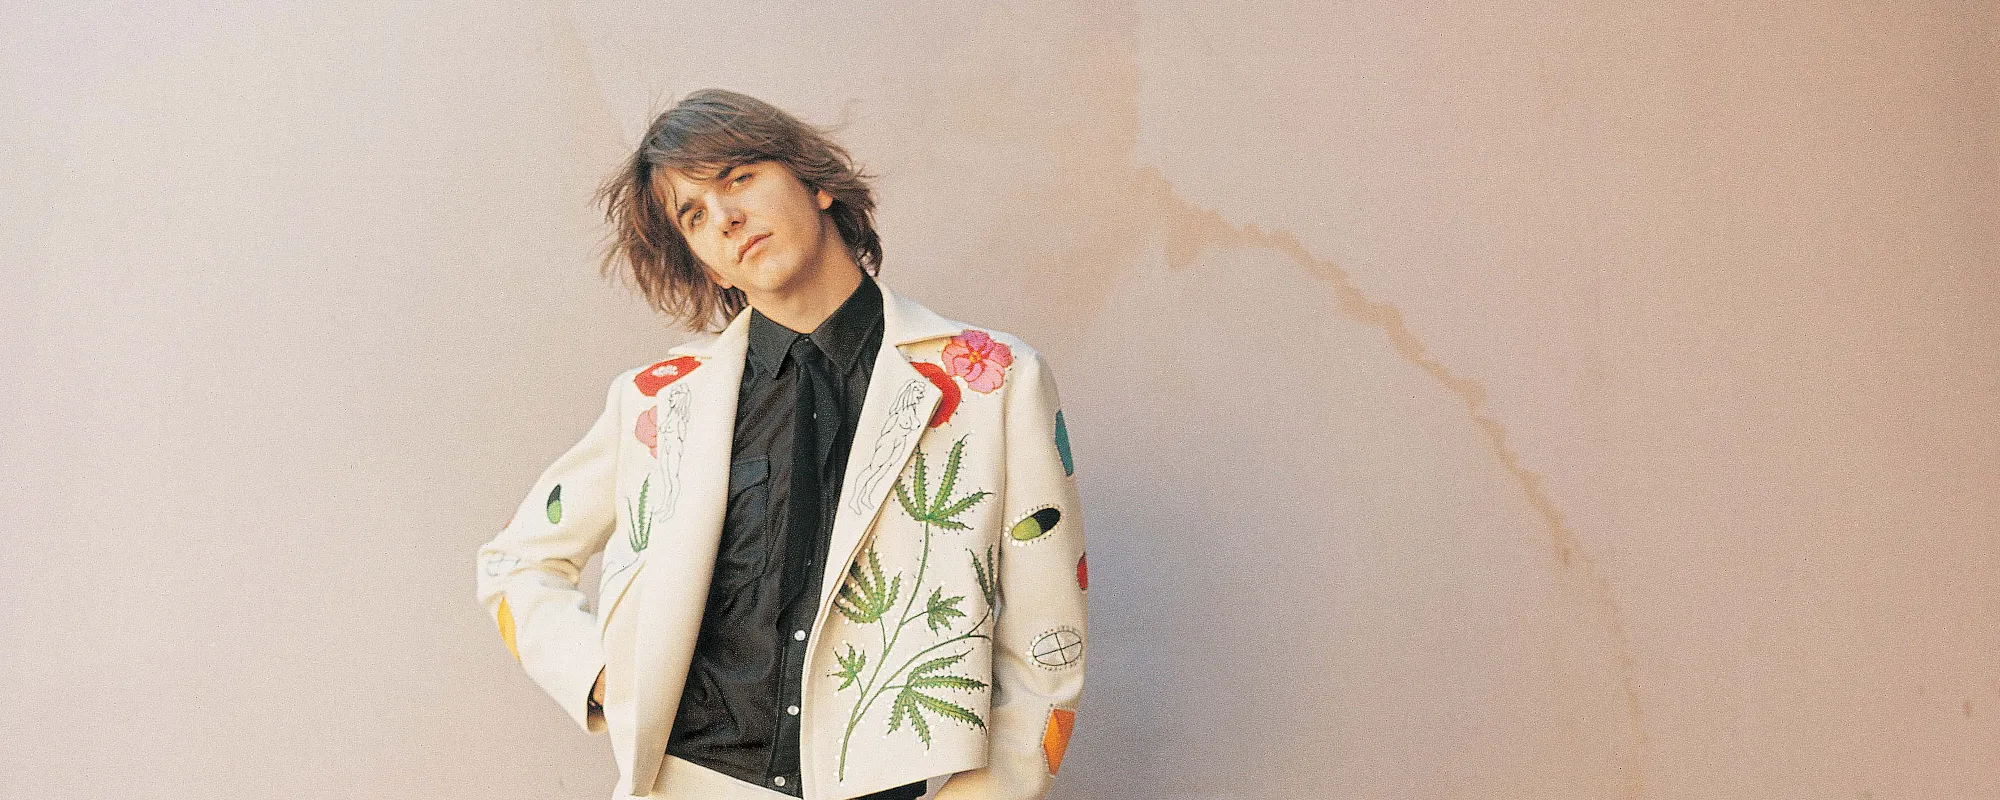 Hear a Stirring Unreleased Live Version of Gram Parsons and the Fallen Angels’ “Love Hurts” from Upcoming LP